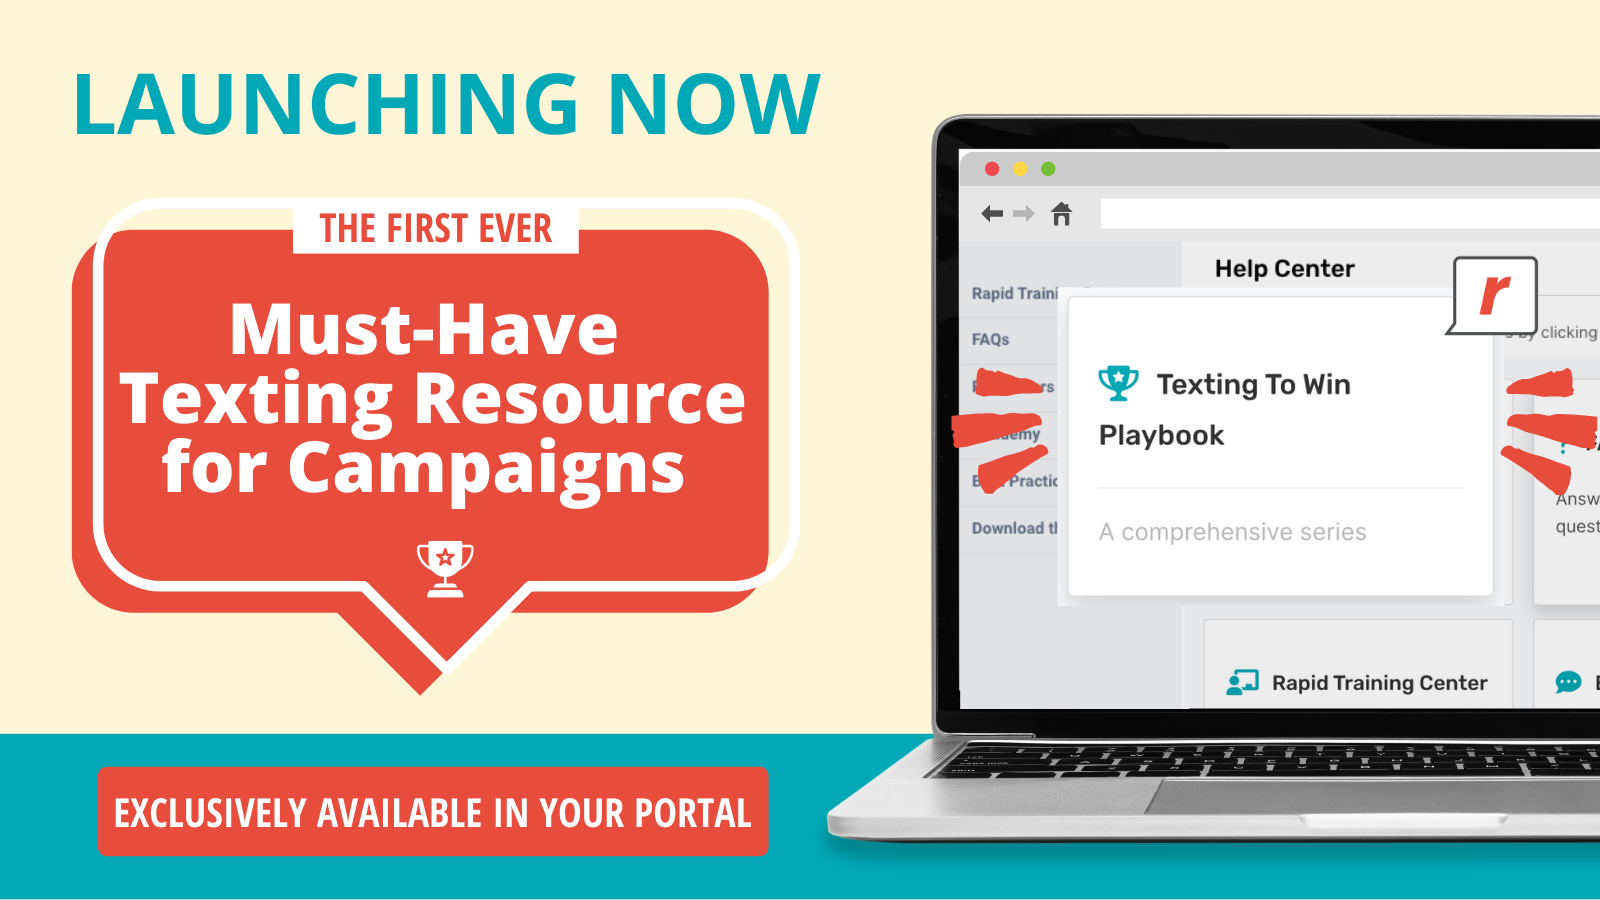 Why Our New Texting to Win Playbook is the Must-Have Texting Resource for Campaigns in 2022